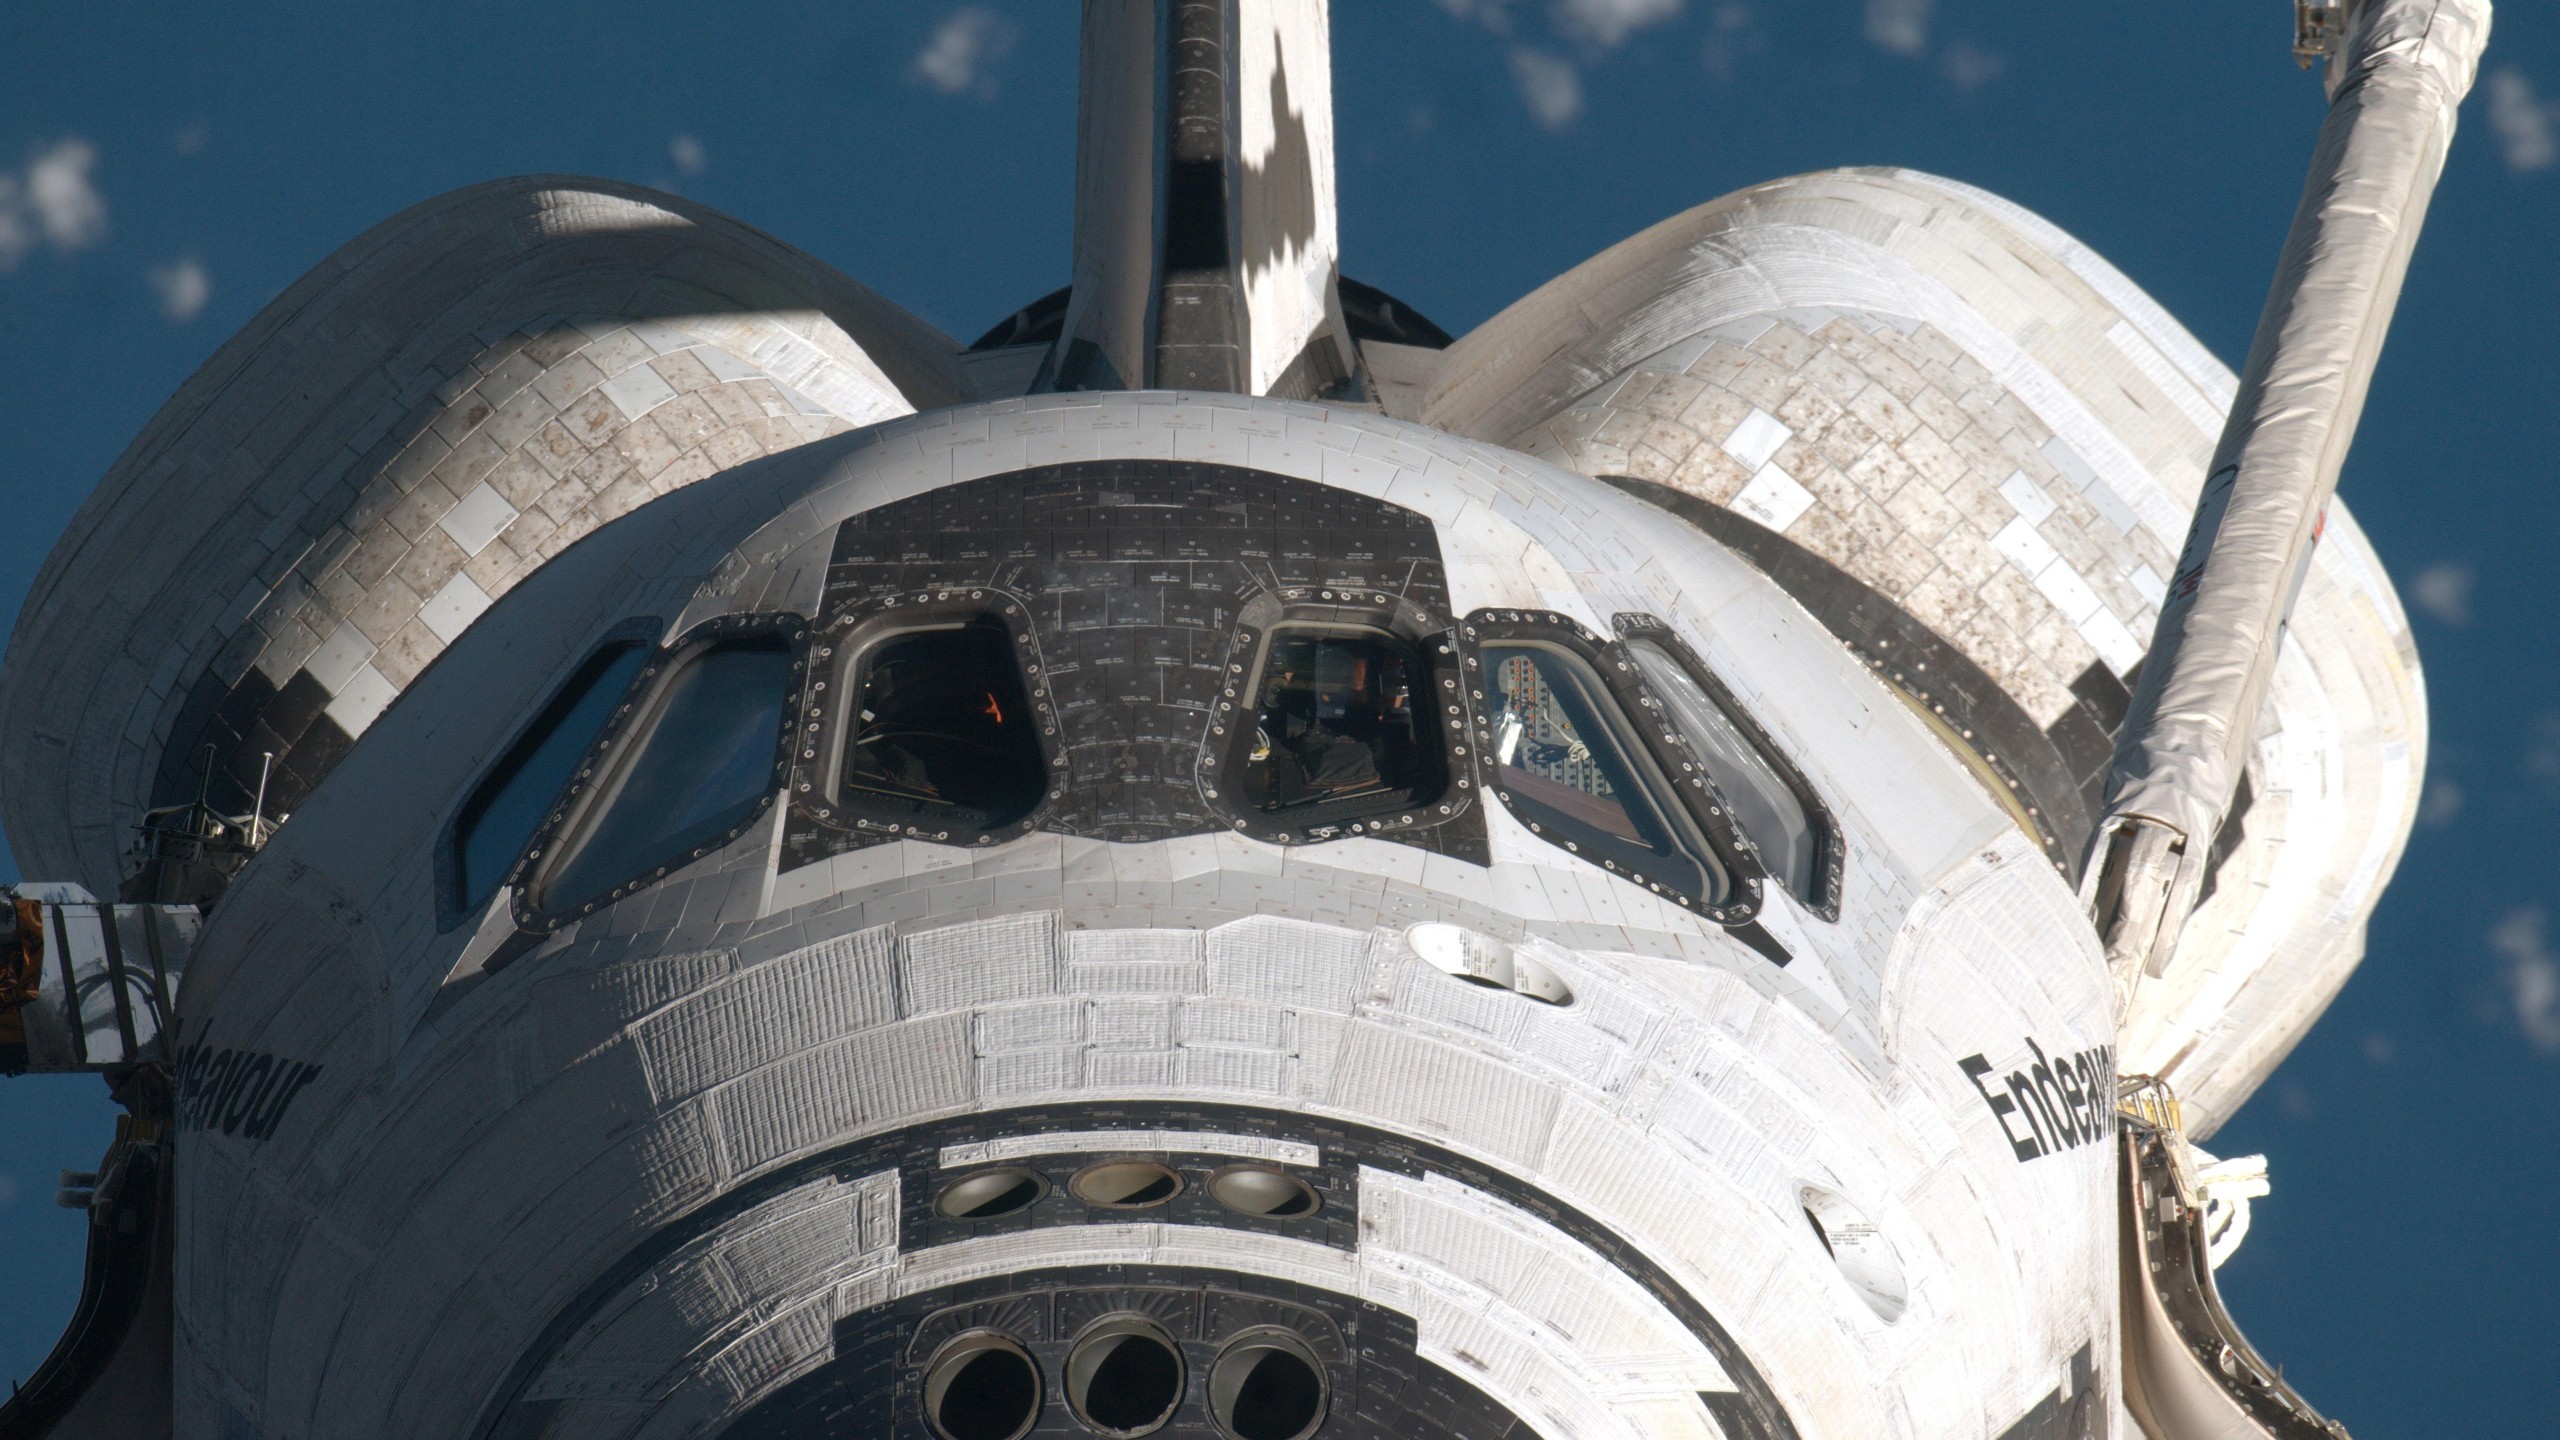 General 2560x1440 space shuttle Endeavour vehicle Space Shuttle Endeavour space